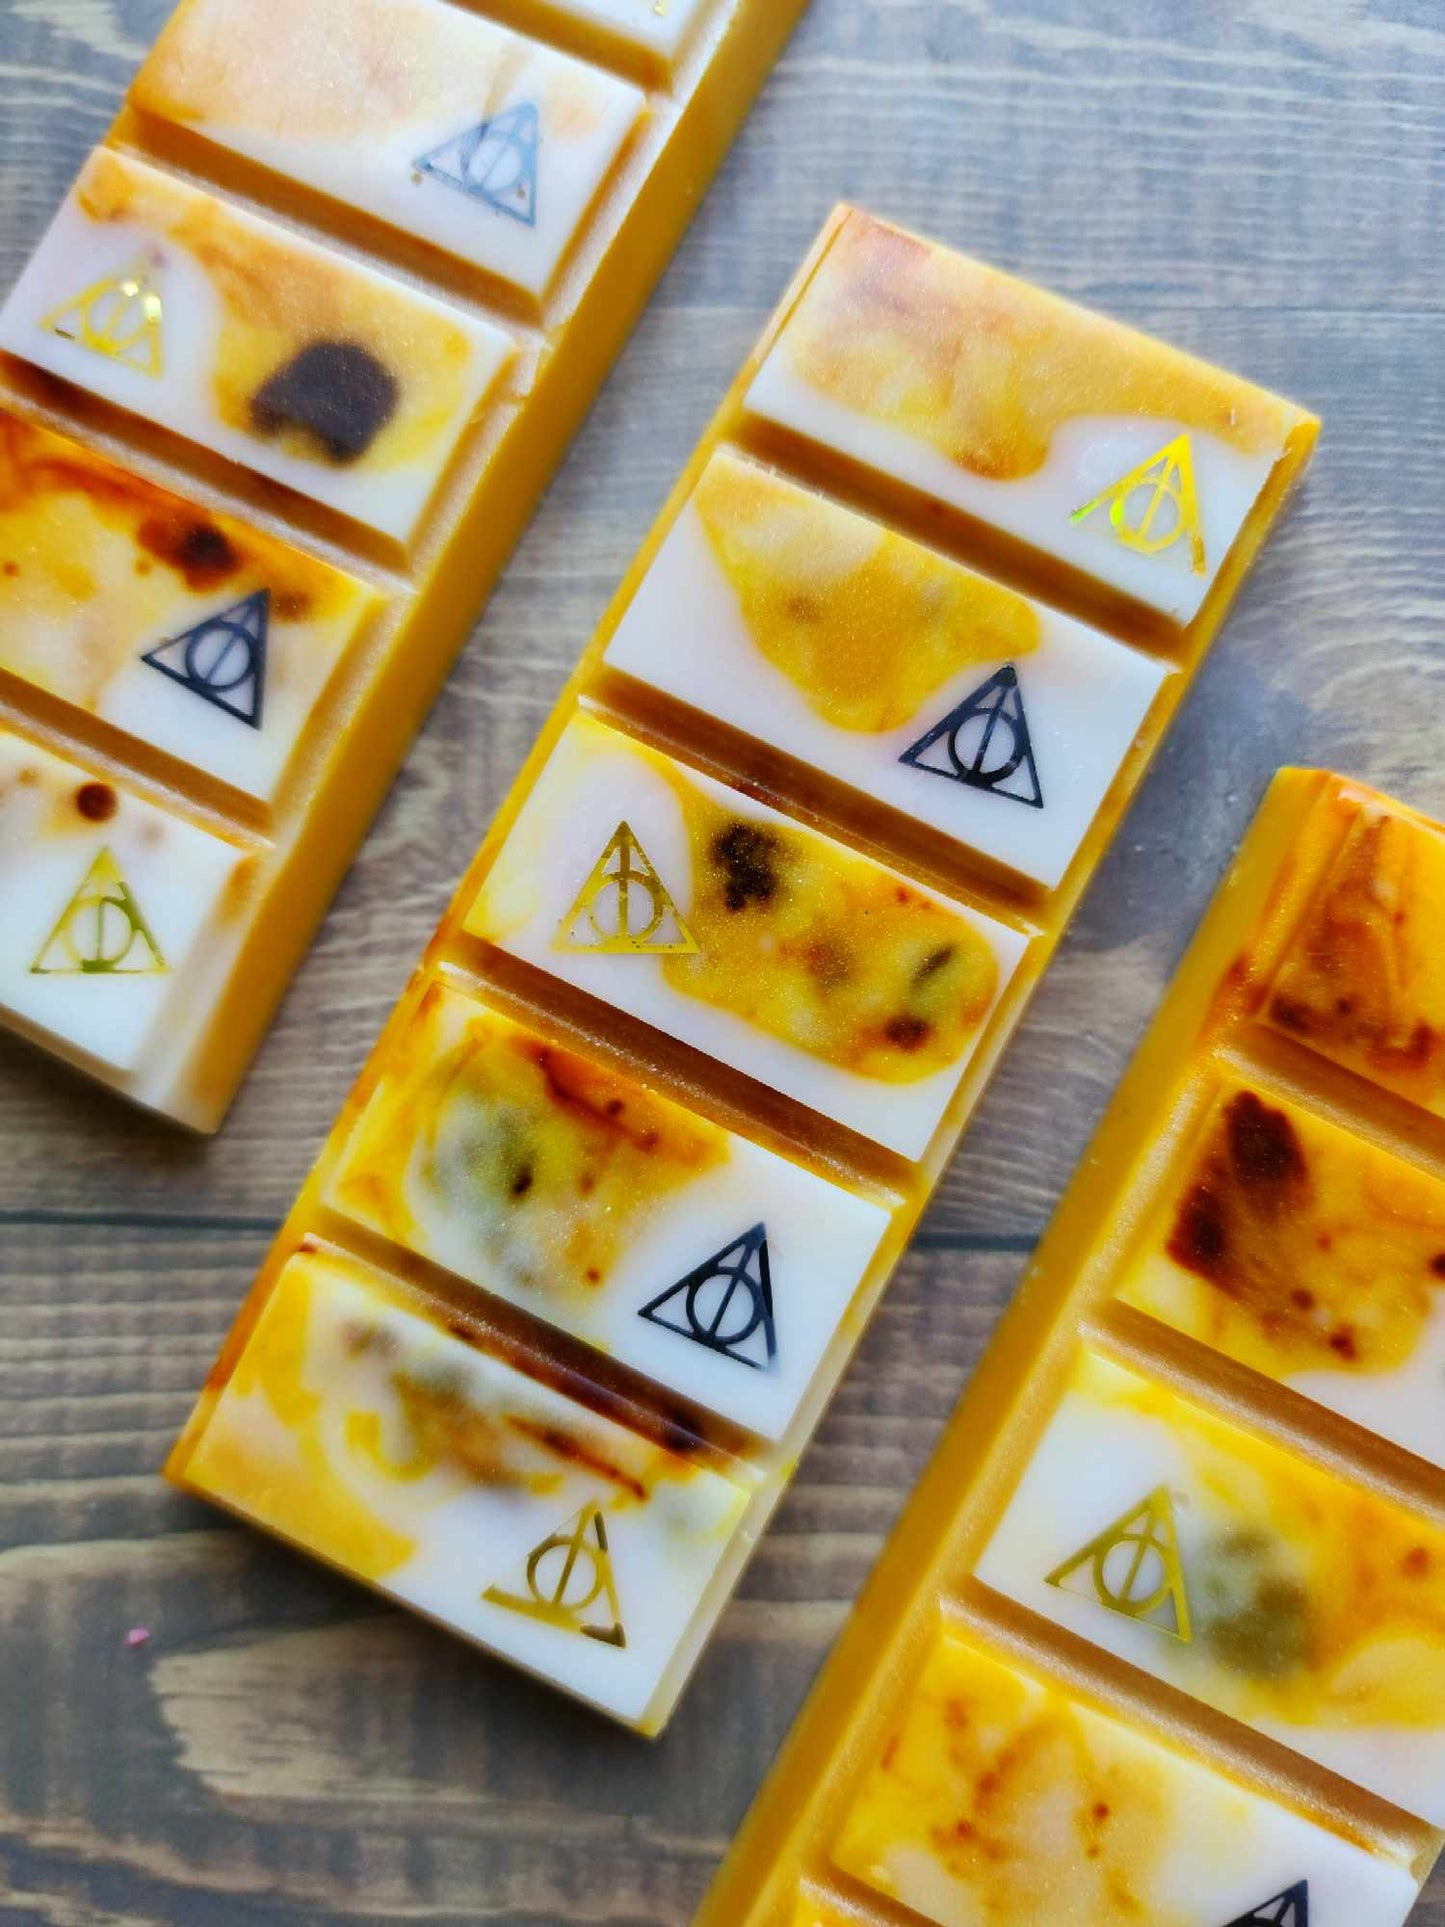 Friendly | Sorting Collection | HP Inspired Wax Melts